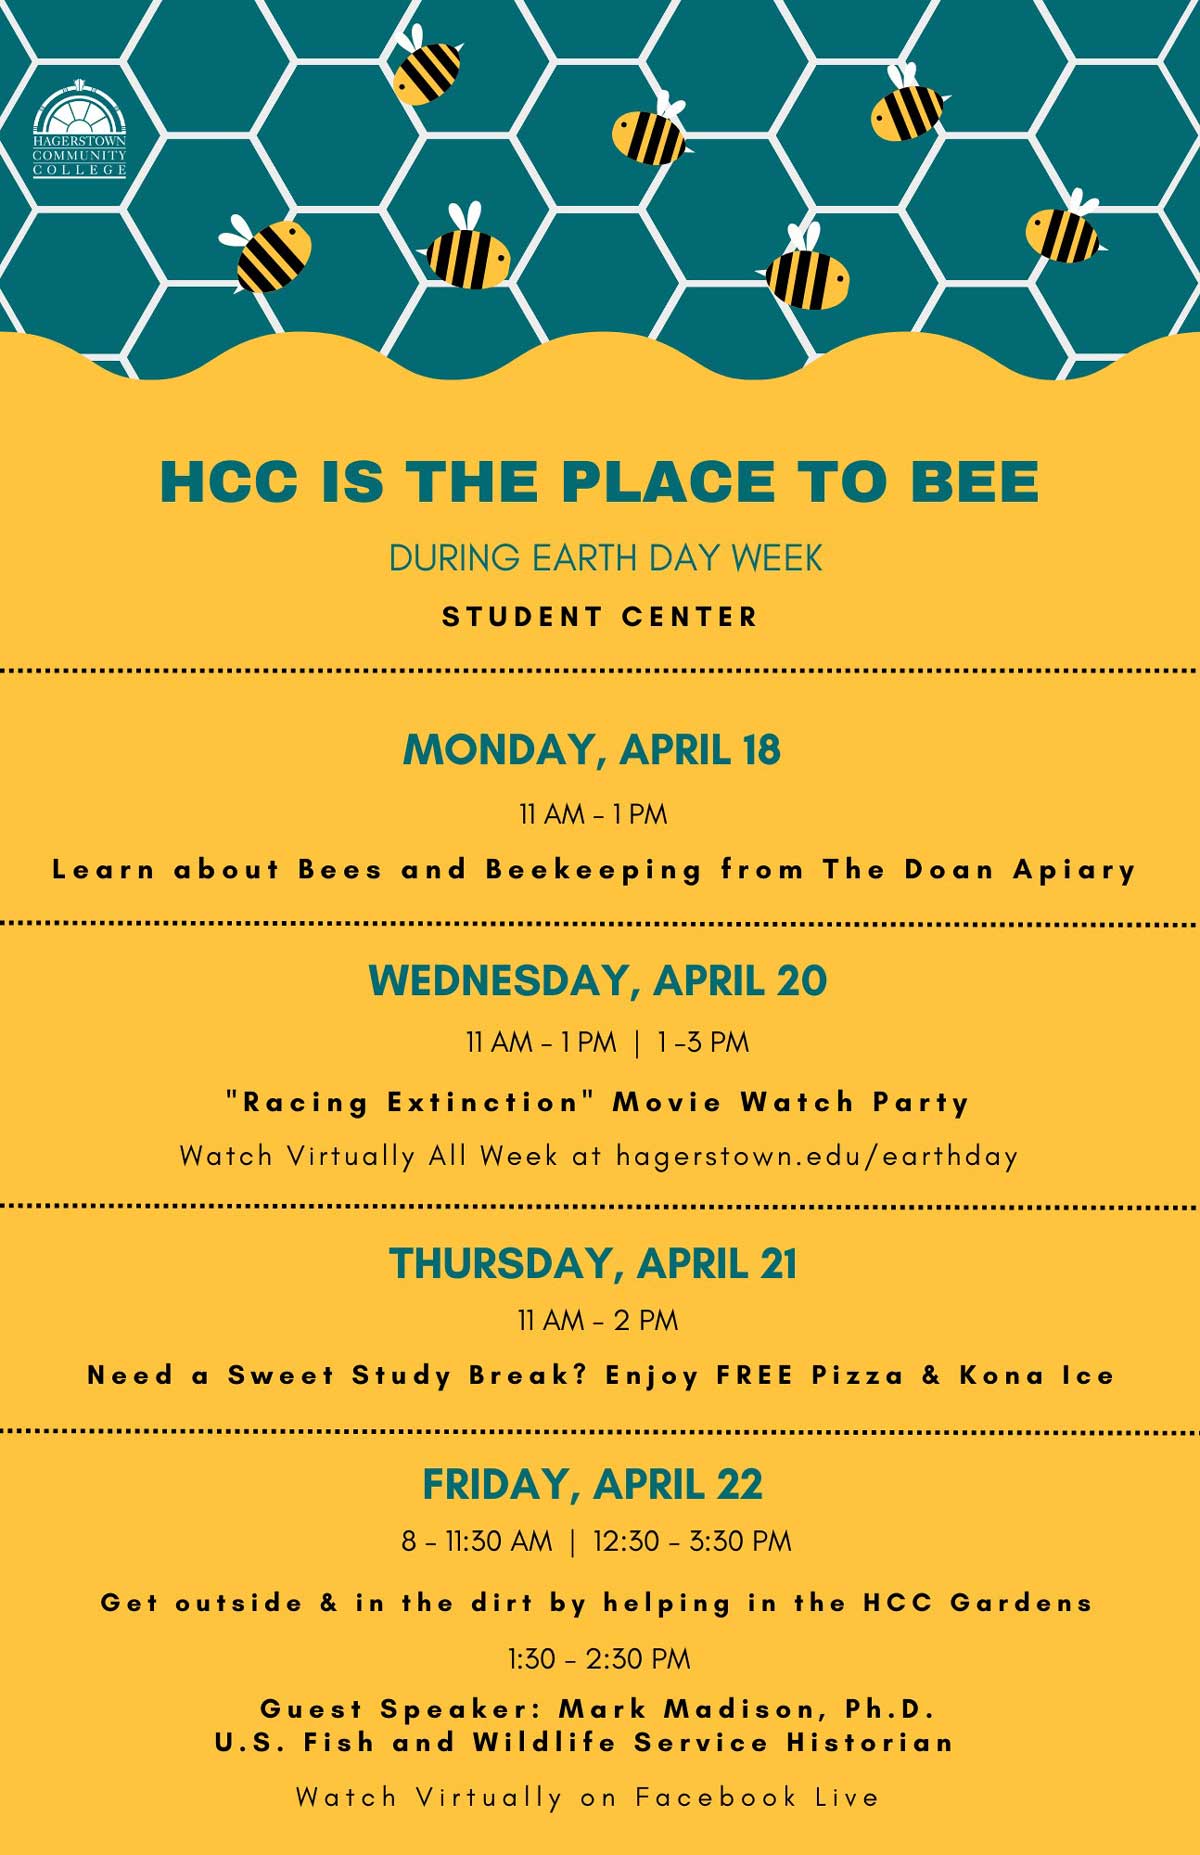 HCC is the Place to Bee on Earth Day 2022. Click here to learn more abou the events planned for this week.